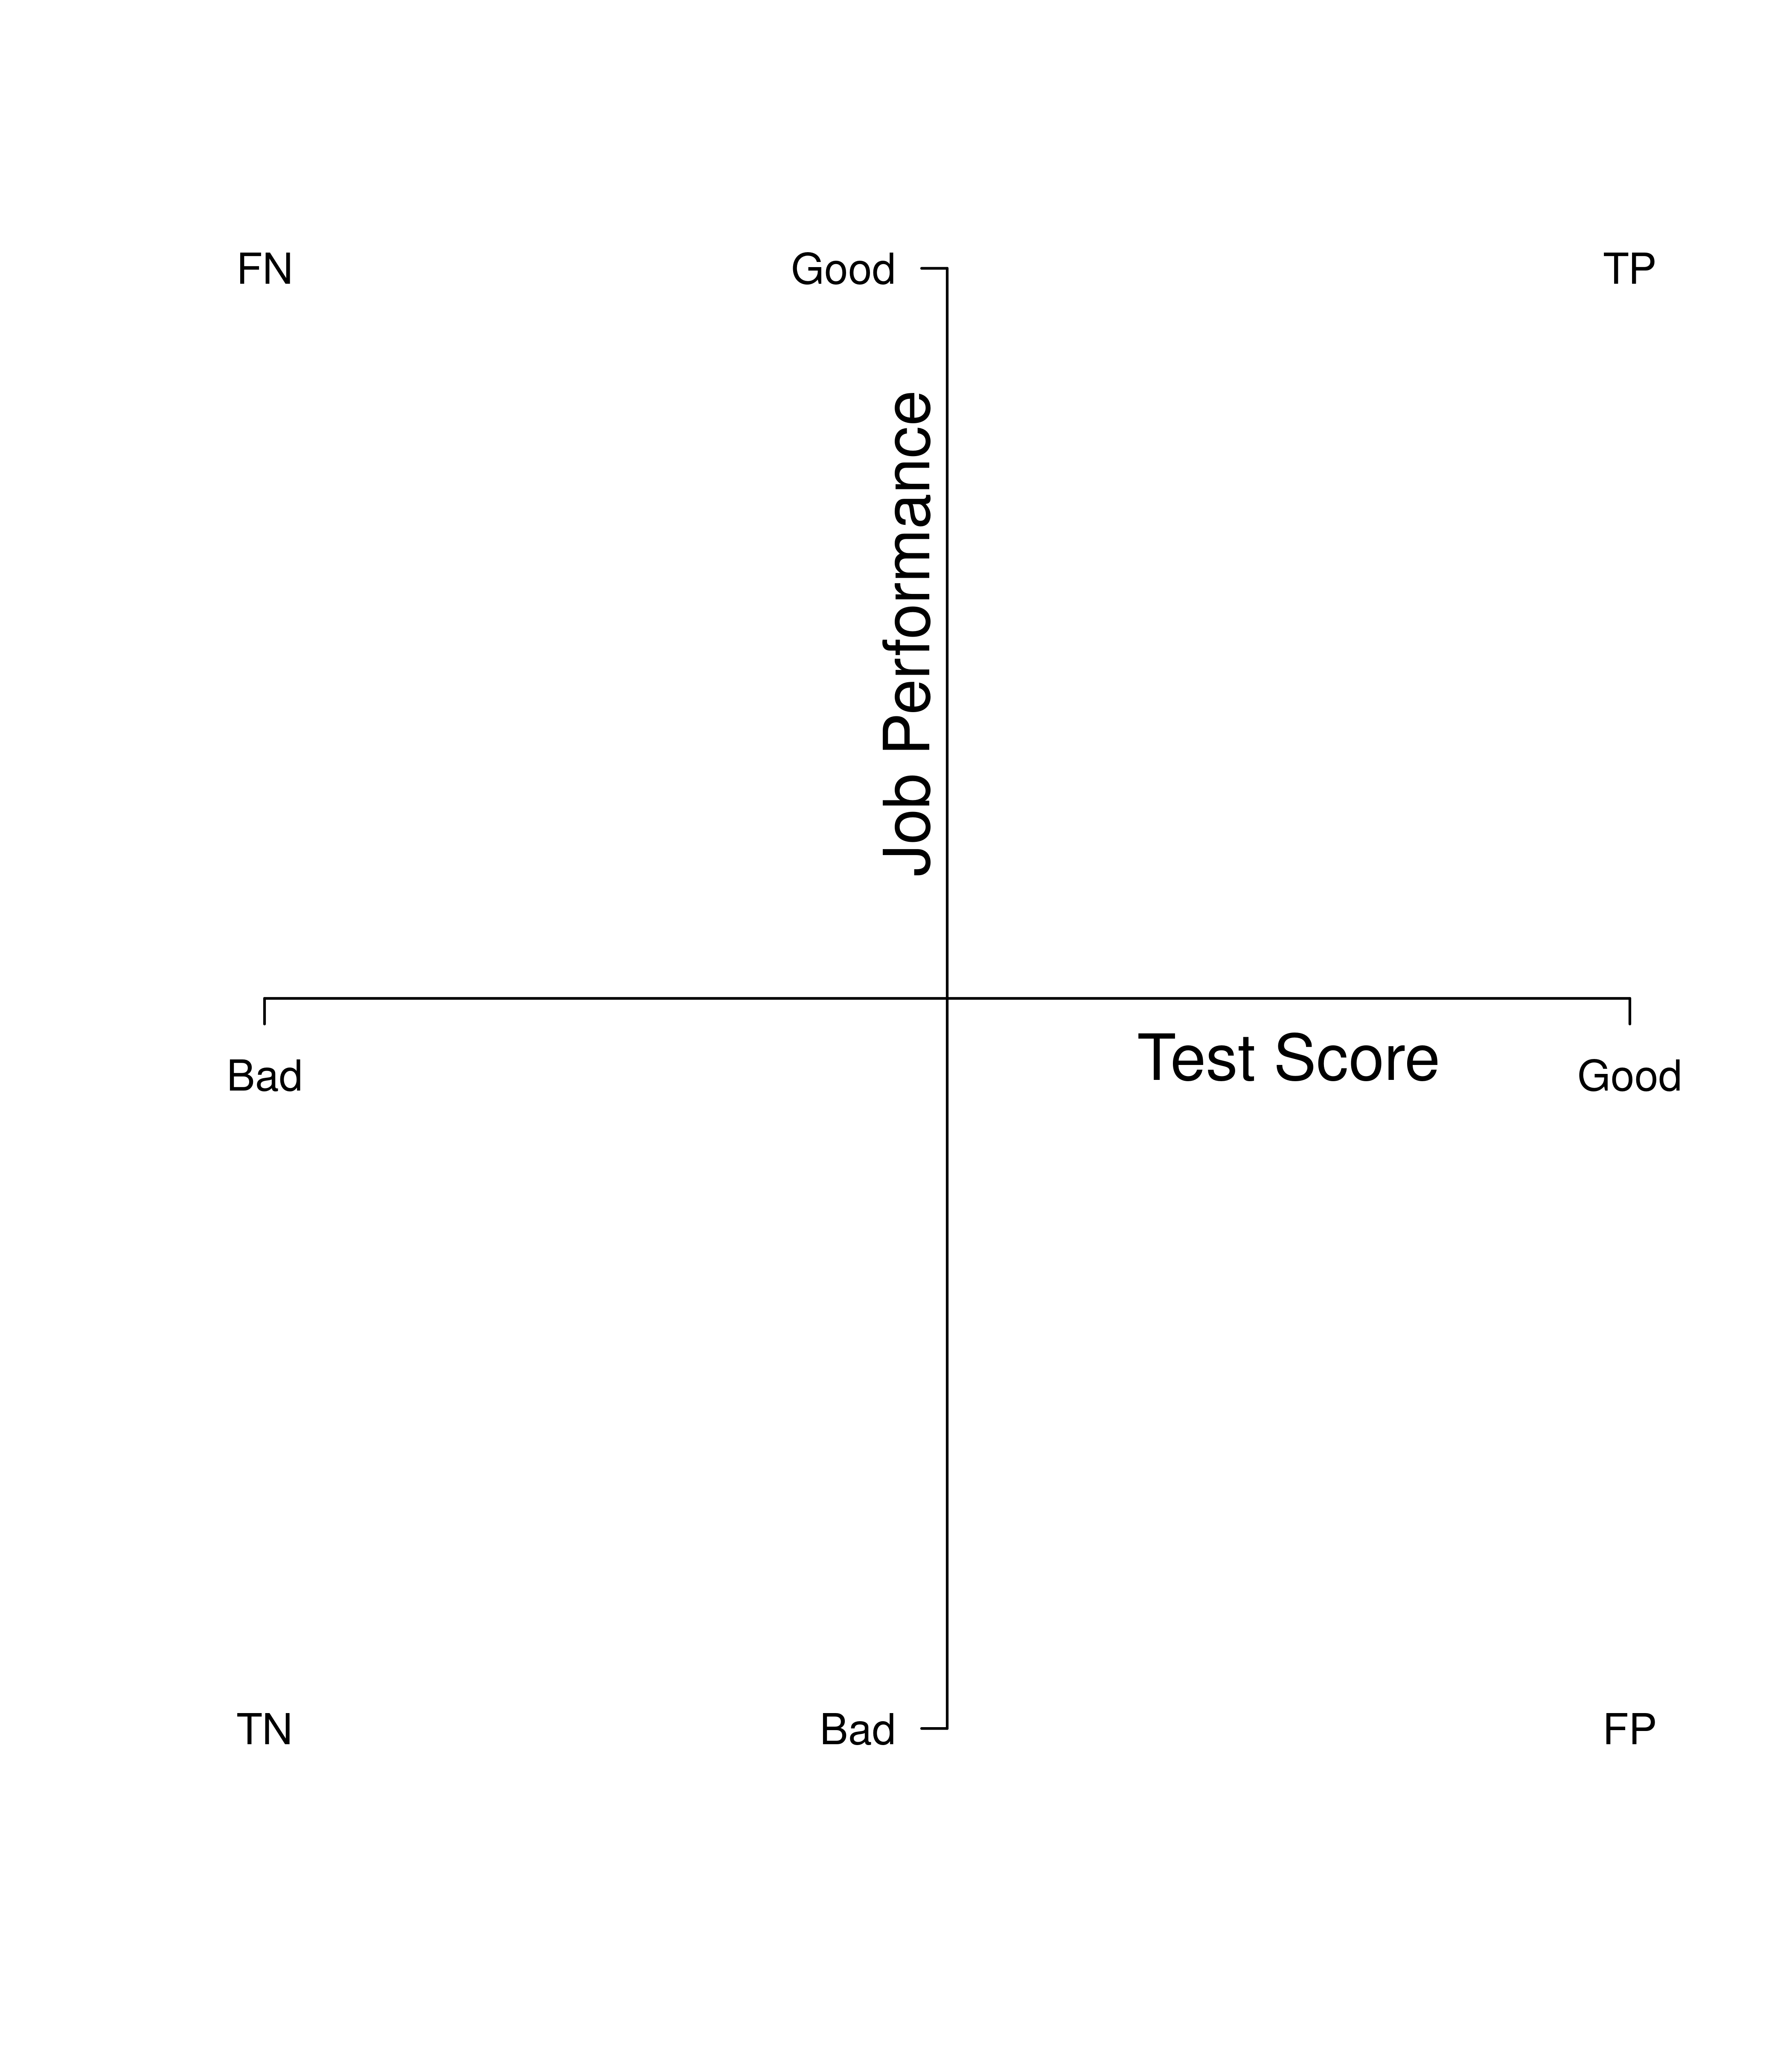 2x2 Confusion Matrix for Job Selection in the Form of a Graph With Predicted Performance on the x-Axis and Actual Job Performance on the y-Axis. TP = true positive; TN = true negative; FP = false positive; FN = false negative.